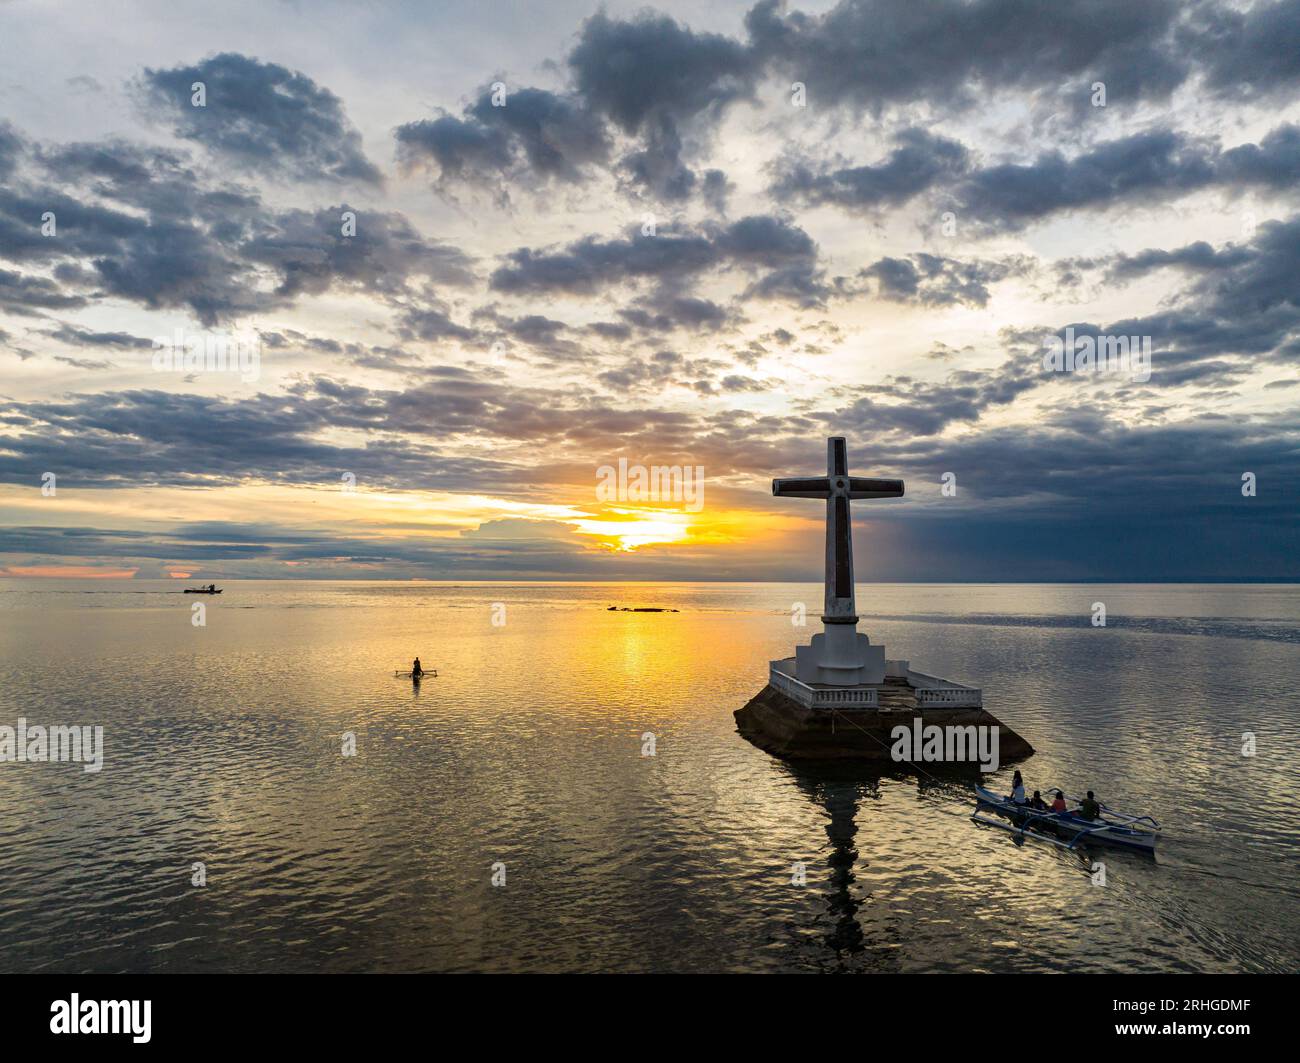 People on the boat floating near the Sunken Cemetery in Camiguin Island. Philippines. Seascape. Stock Photo